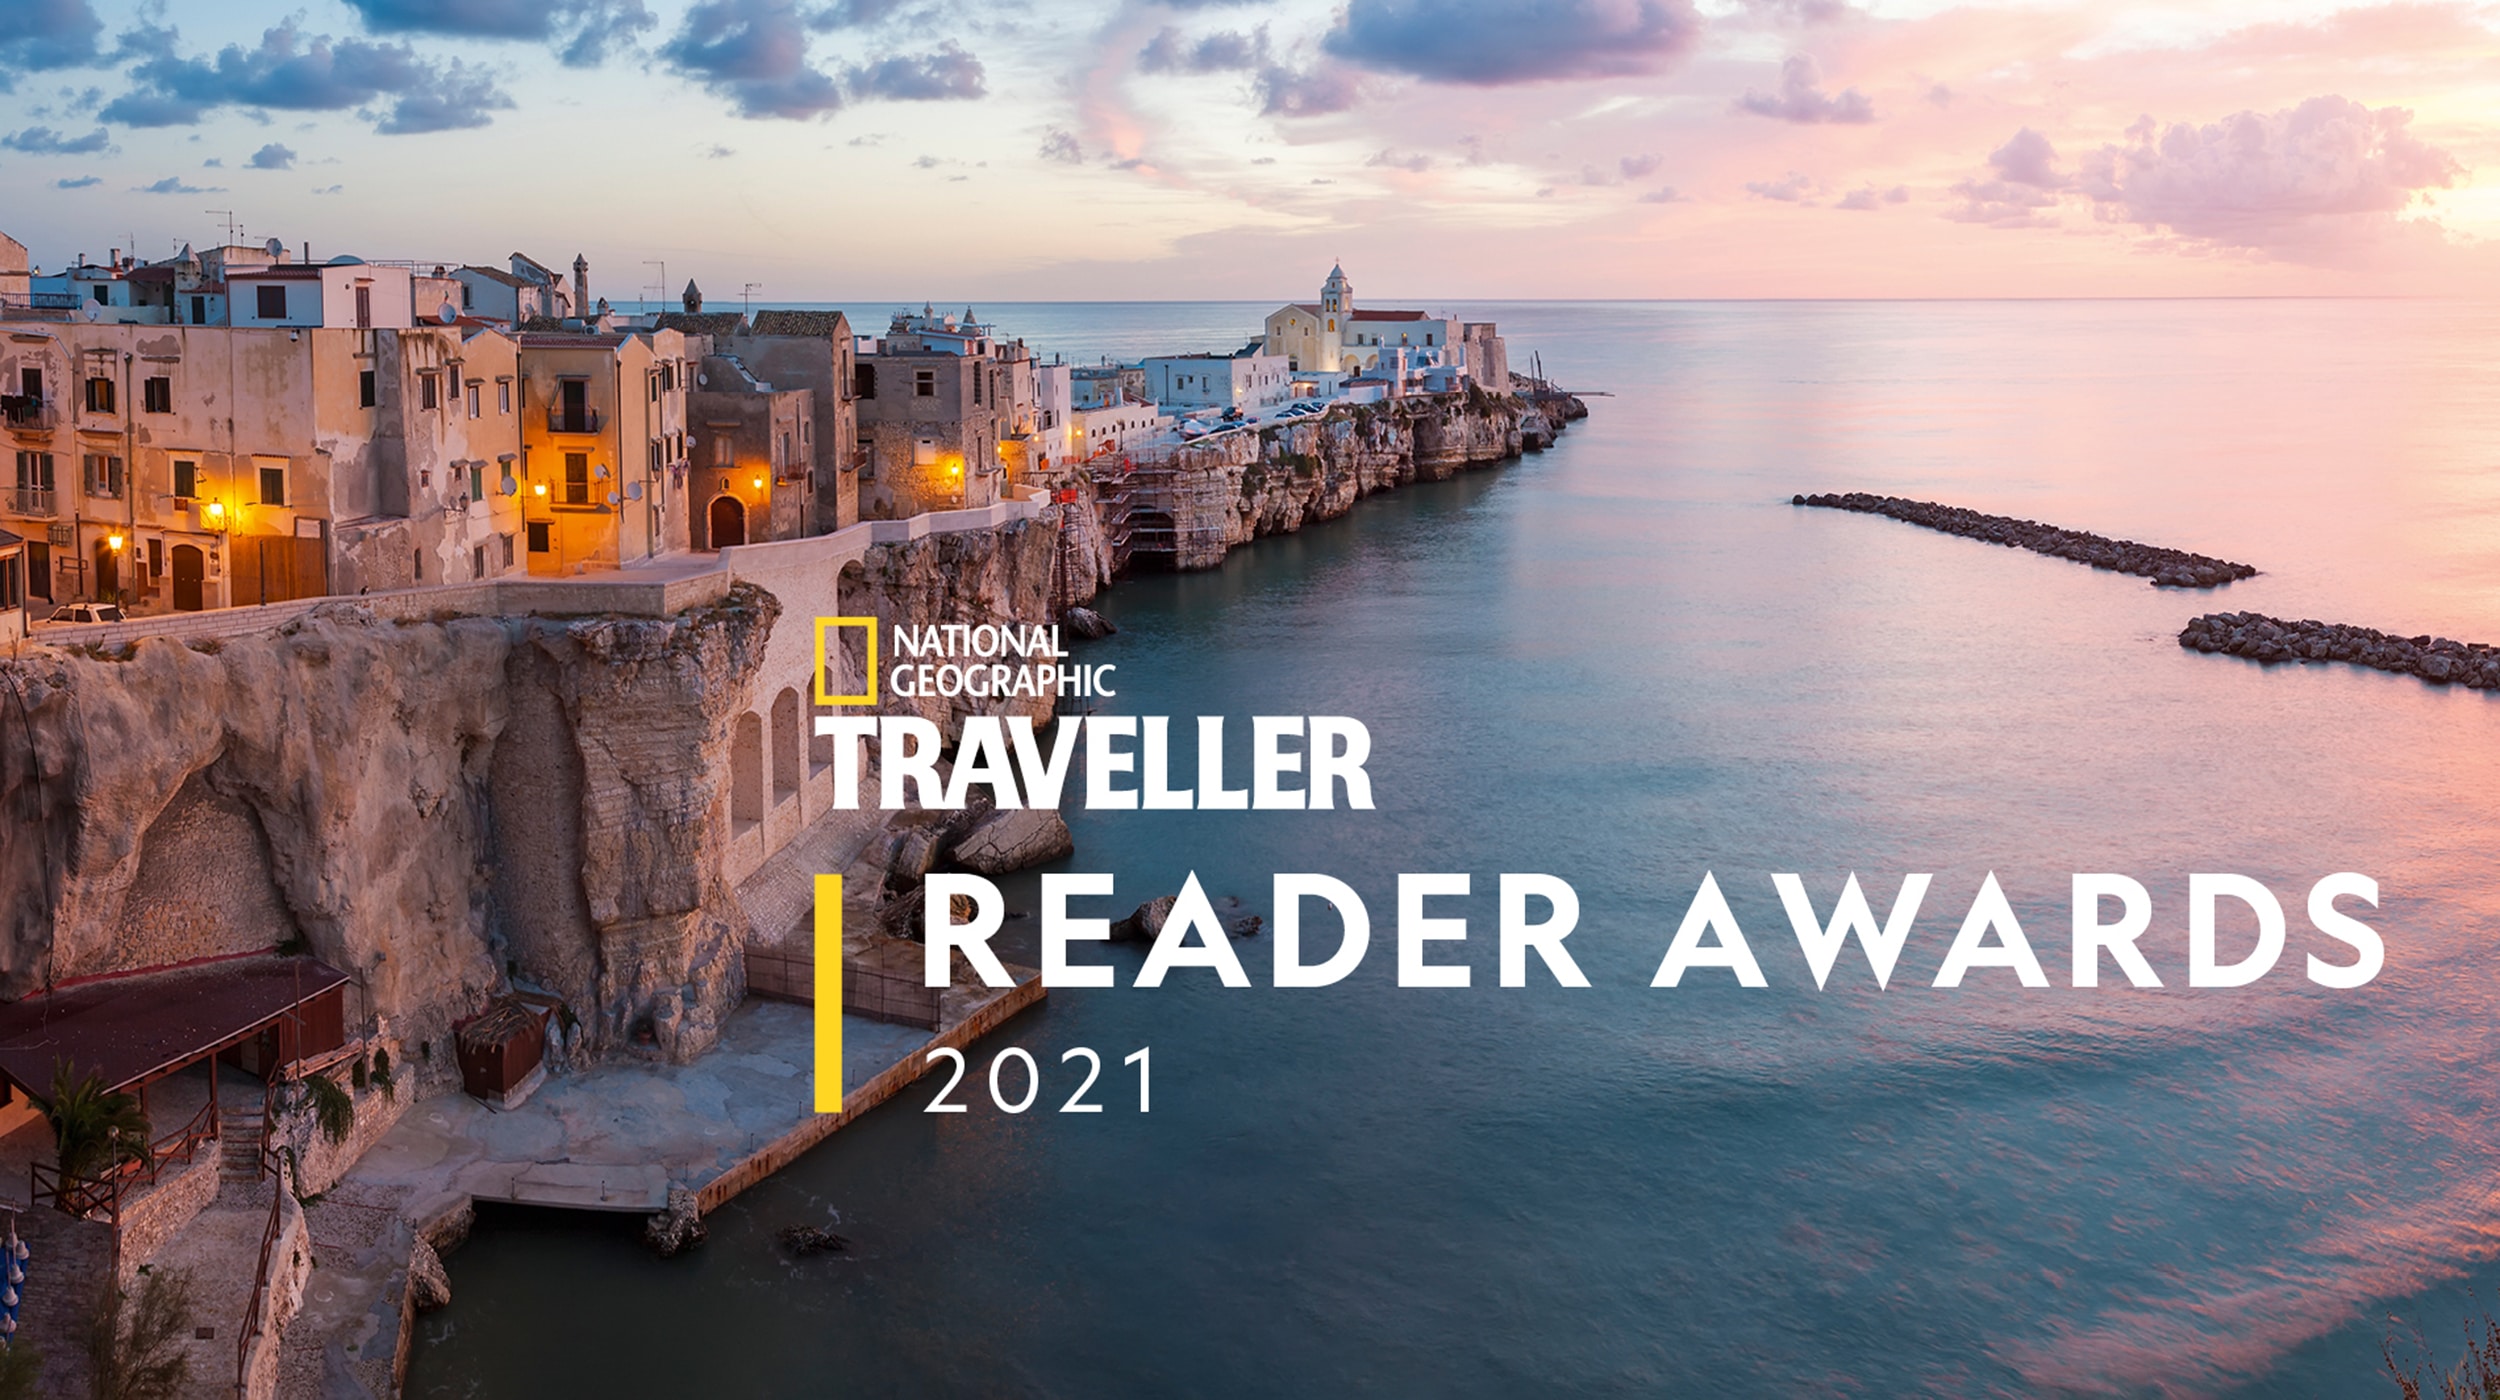 The National Geographic Traveller Reader Awards 2021.